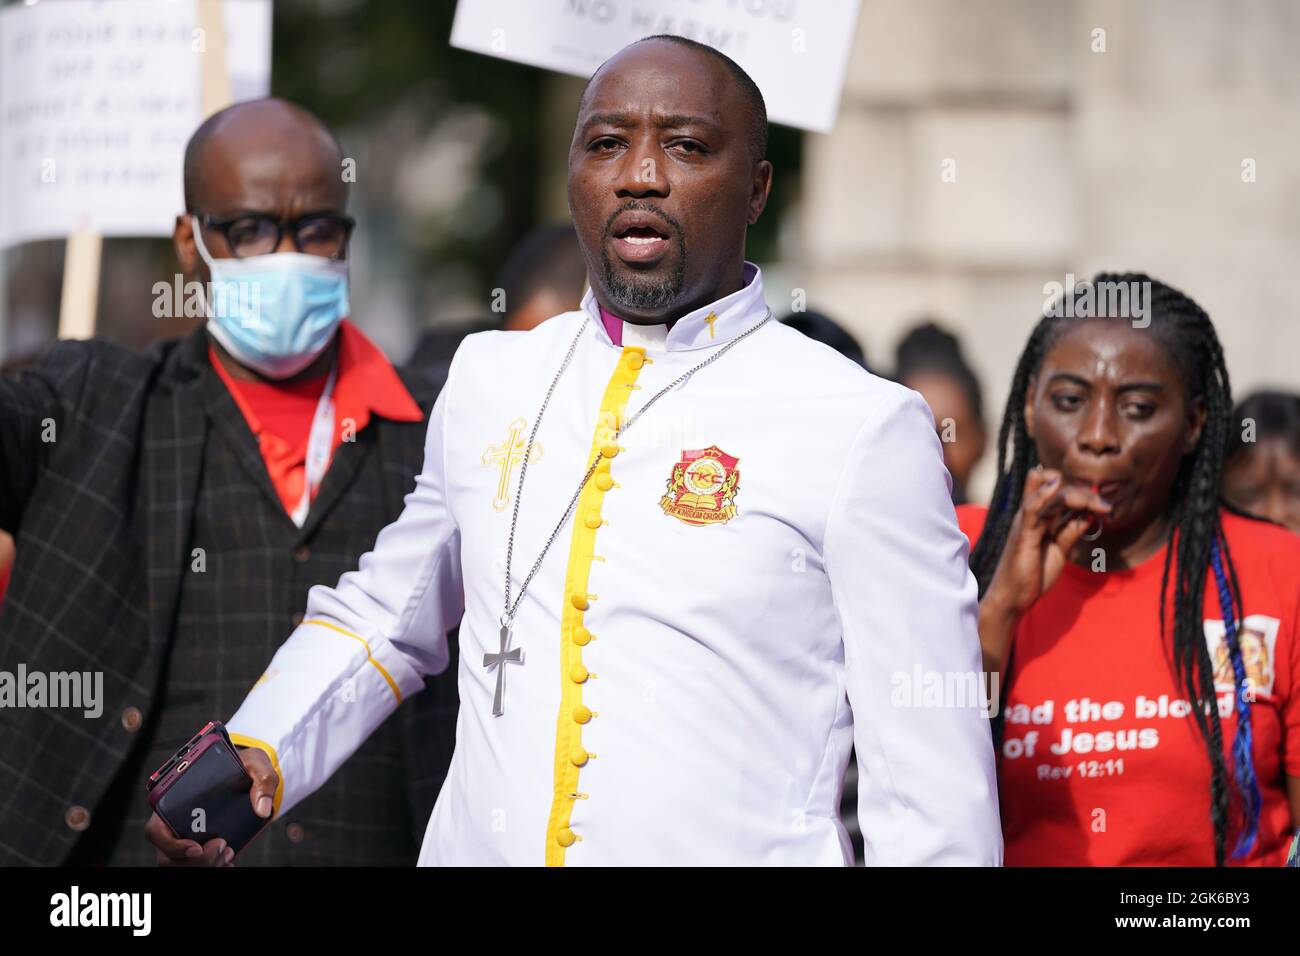 Bishop Climate Wiseman, 46, is greeted by his supporters outside Inner London Crown Court, where he is charged with fraud and unfair trading offences over the selling of 'plague protection kits' with claims a mixture made from oil and red string, was a cure for Covid-19. Picture date: Monday September 13, 2021. Stock Photo